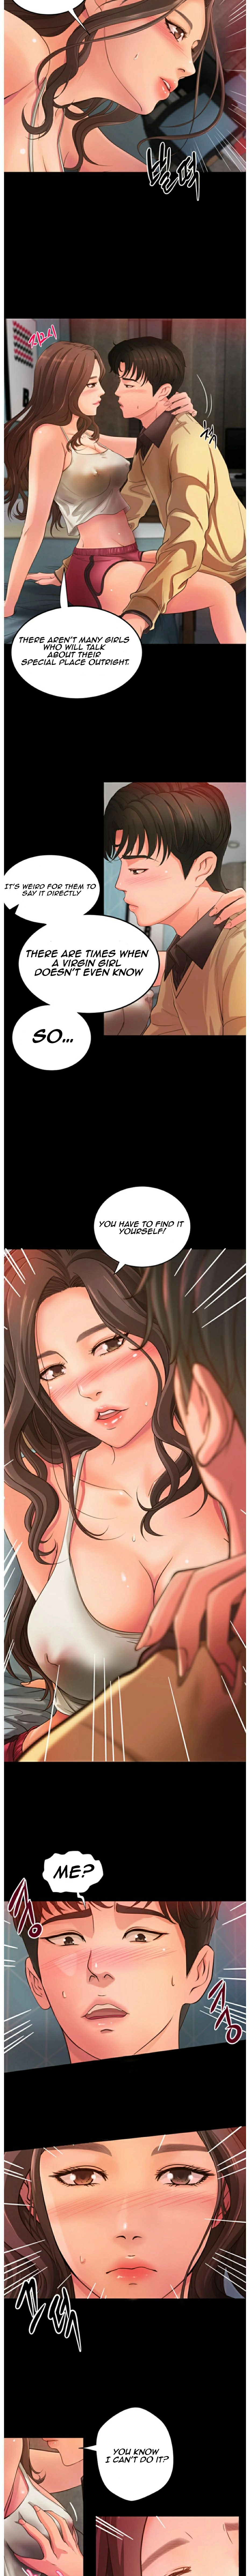 Sister’s Sex Education - Chapter 3 Page 6